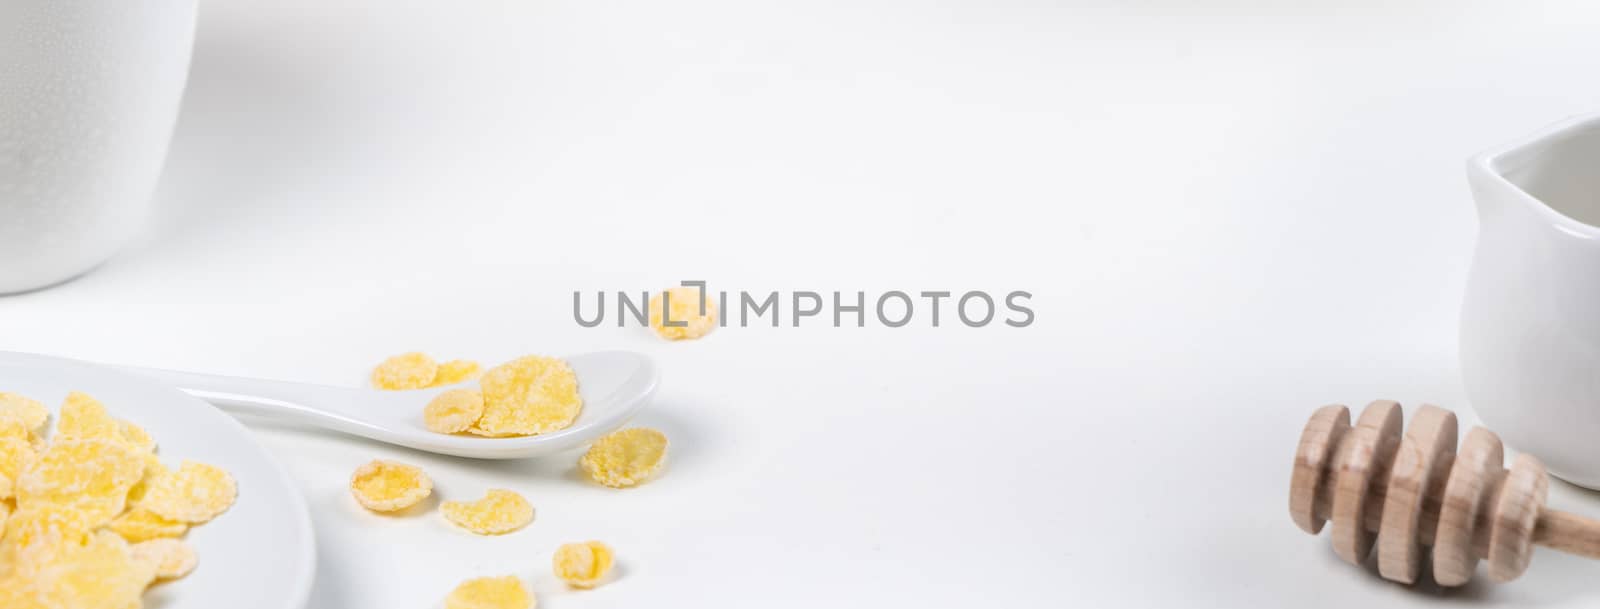 Corn flakes bowl sweeties with milk and orange on white background, close up, fresh and healthy breakfast design concept.